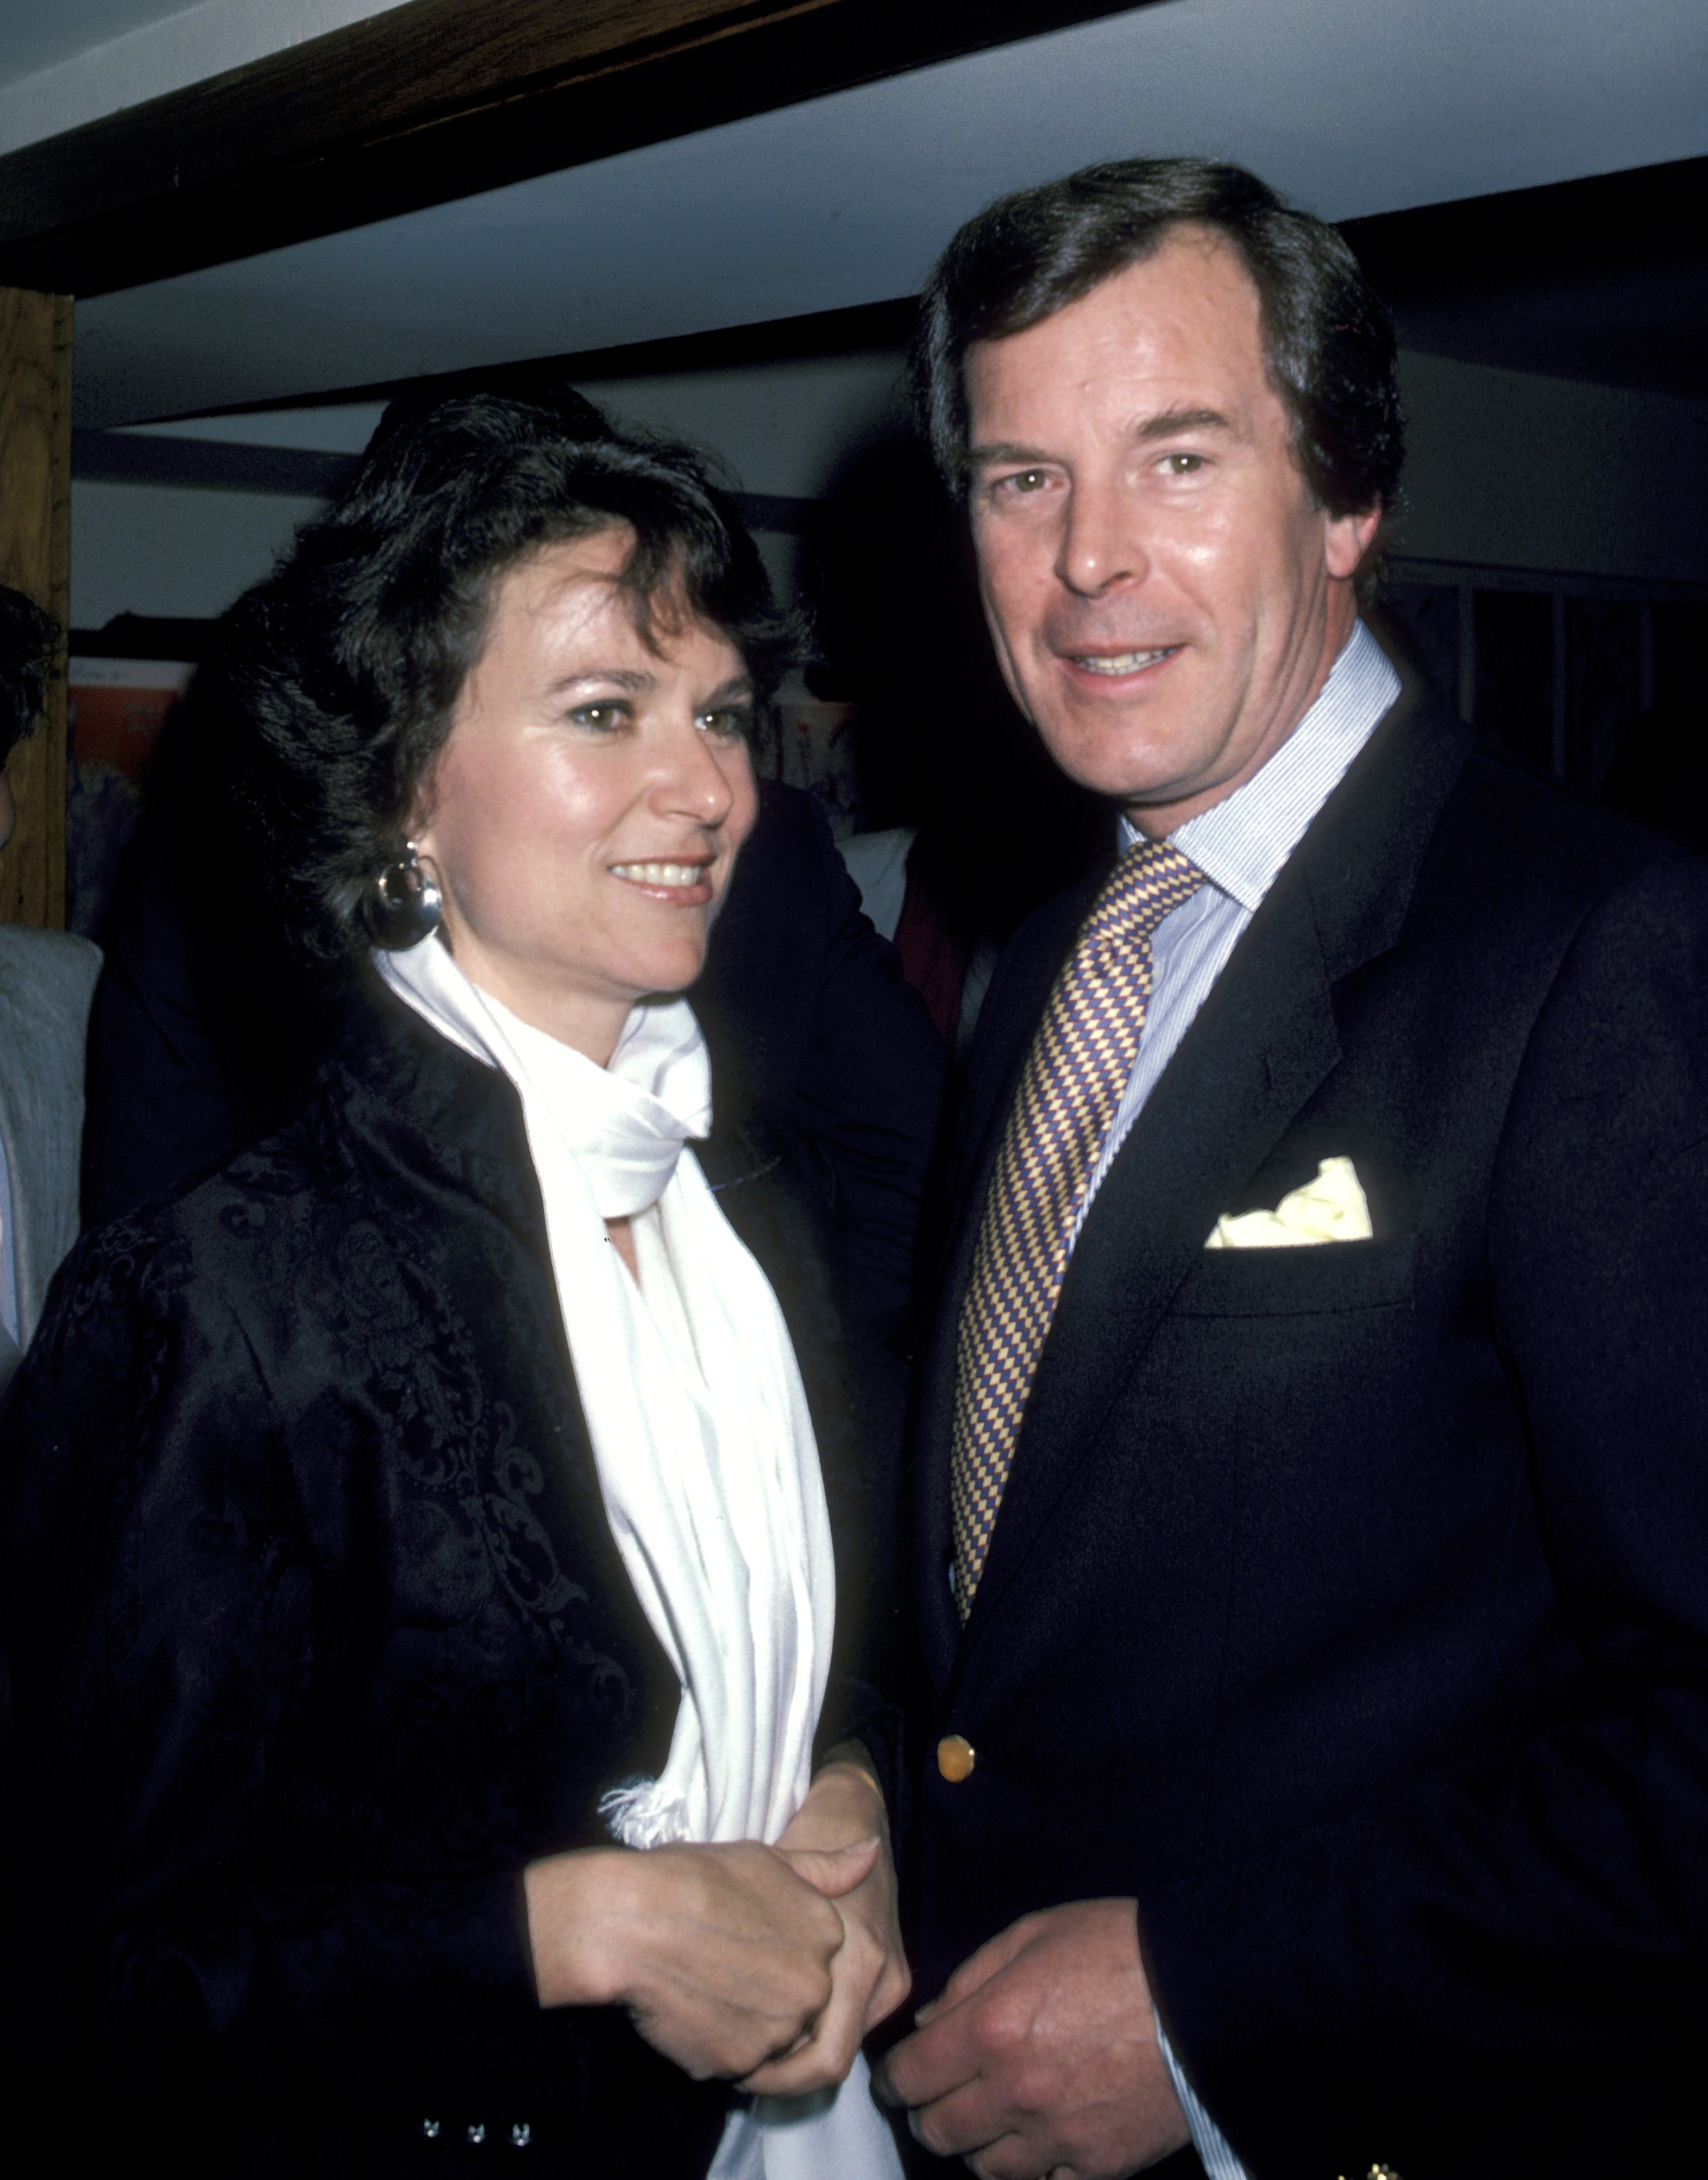 Mom of Peter Jennings' 2 Kids Had an Affair Yet Stayed Married Years ...